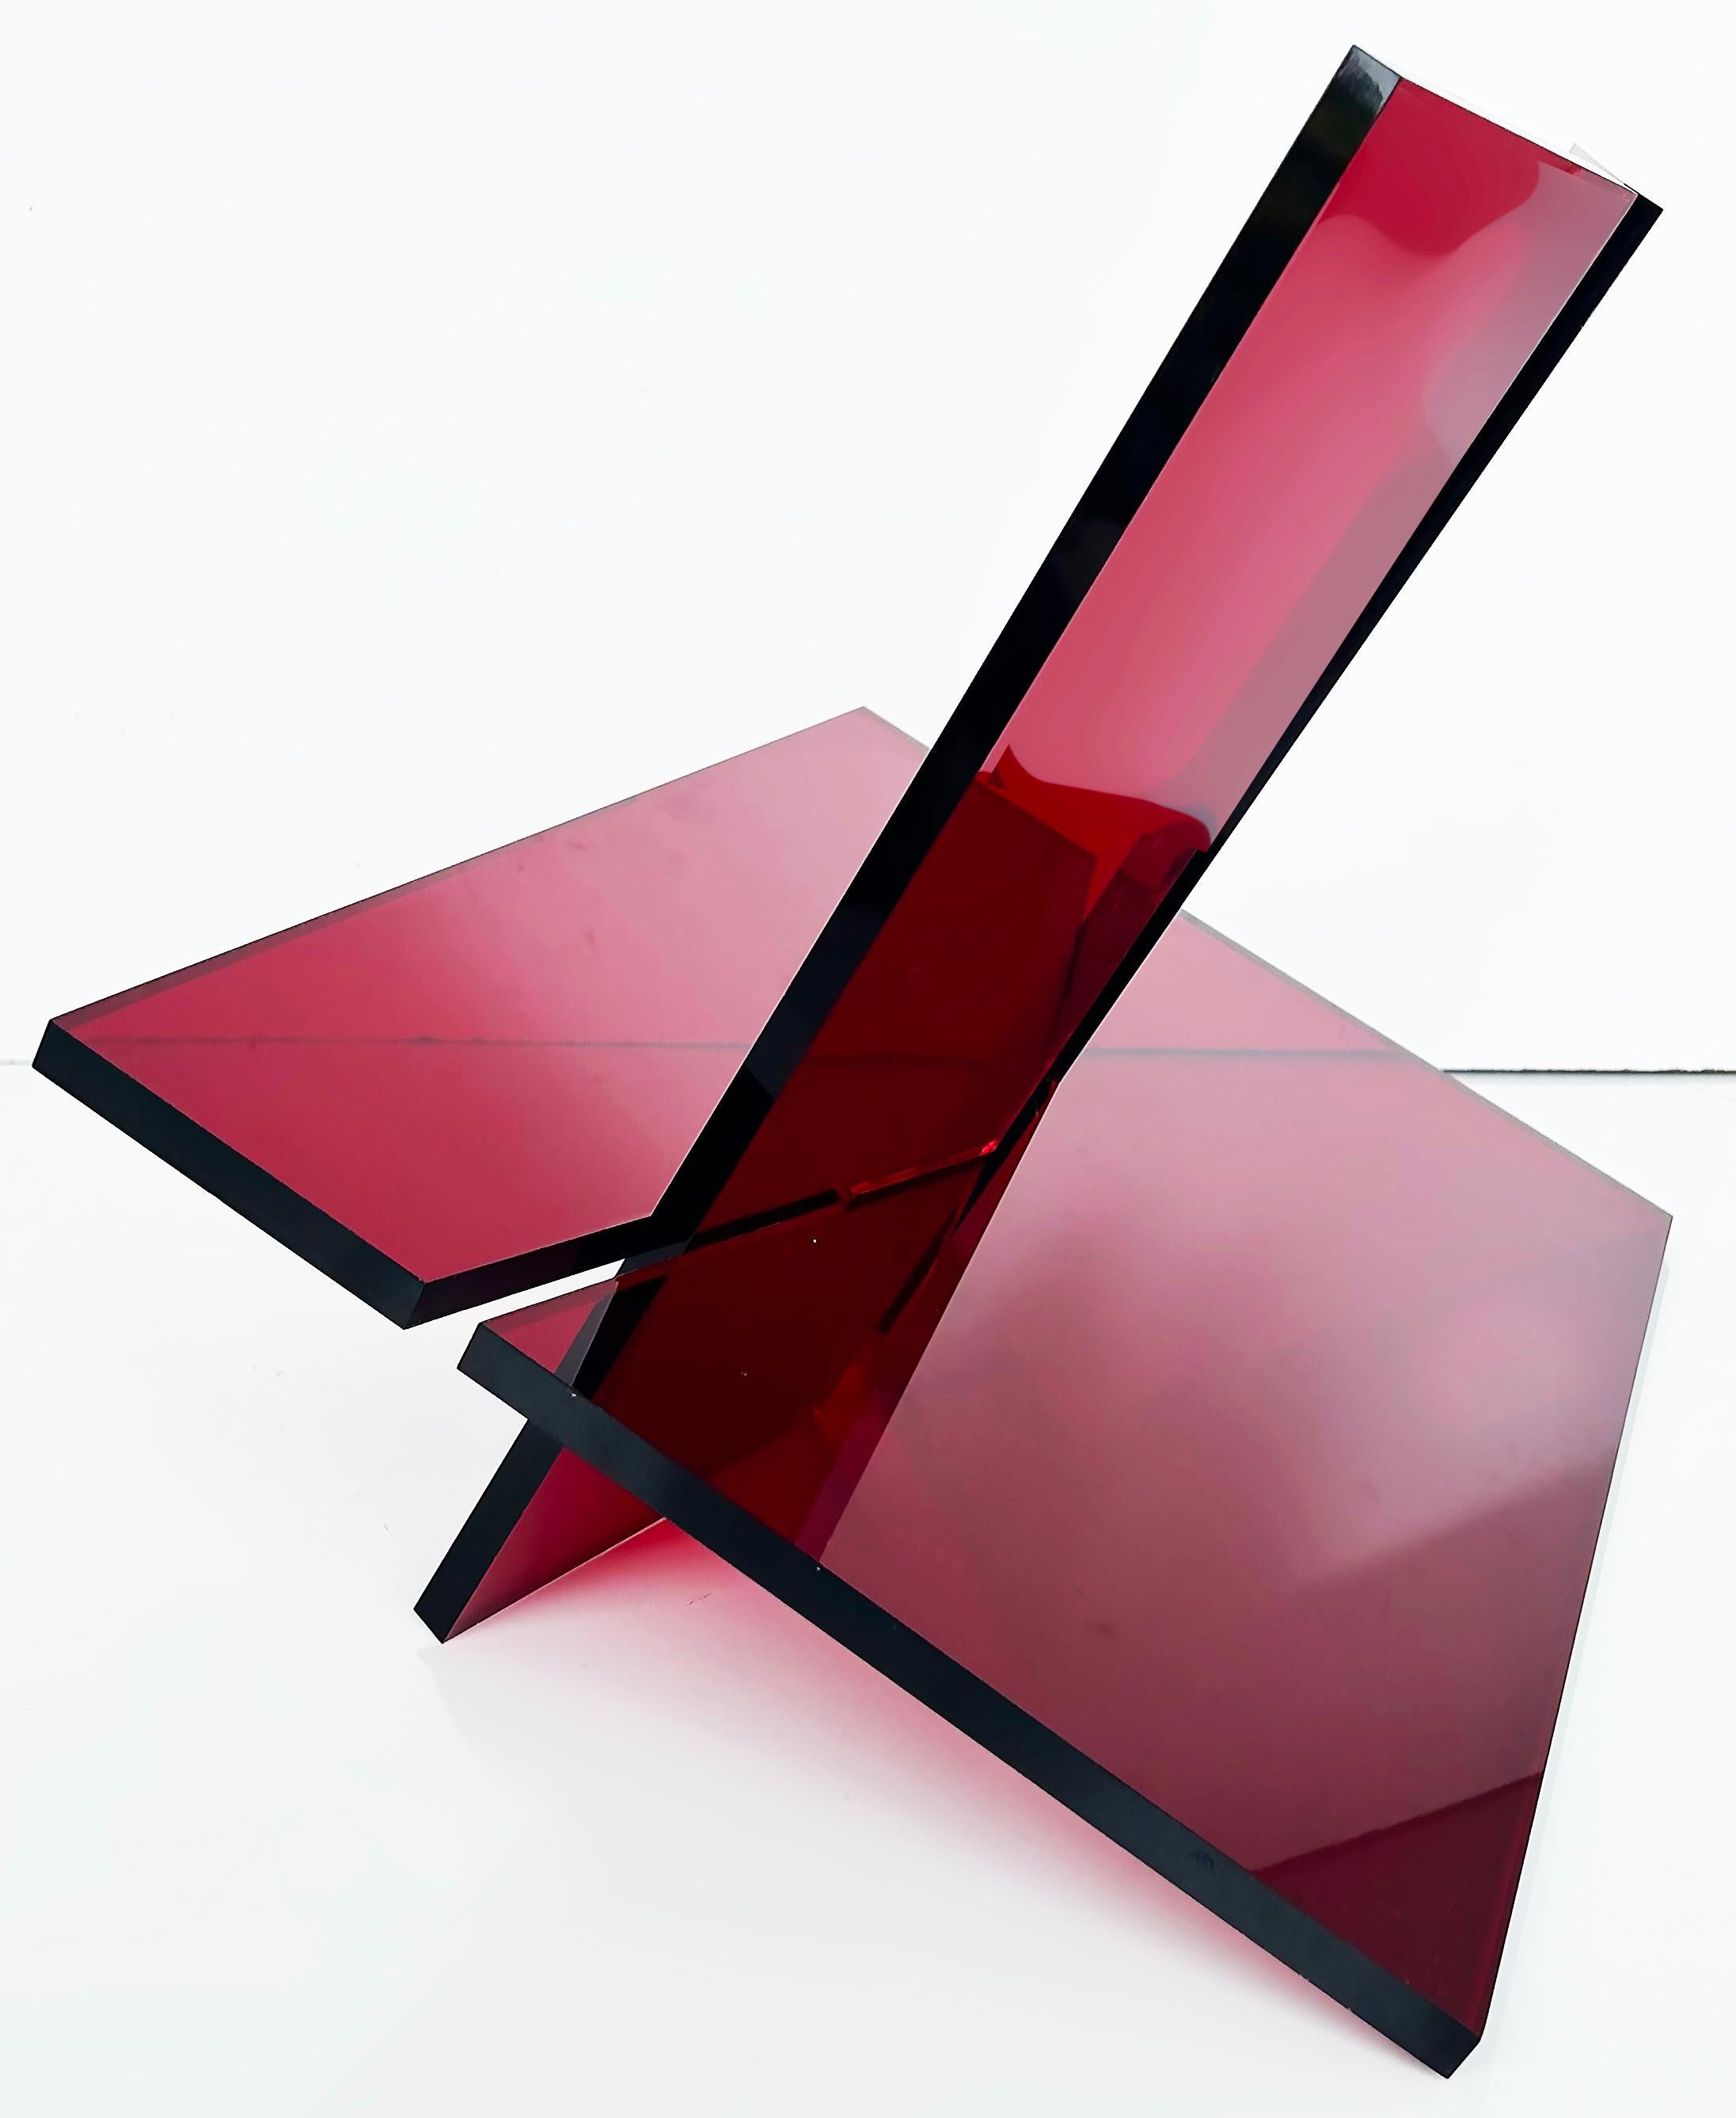 Iconic Design Gallery Custom Red Lucite Tabletop Book Stand For Sale 1